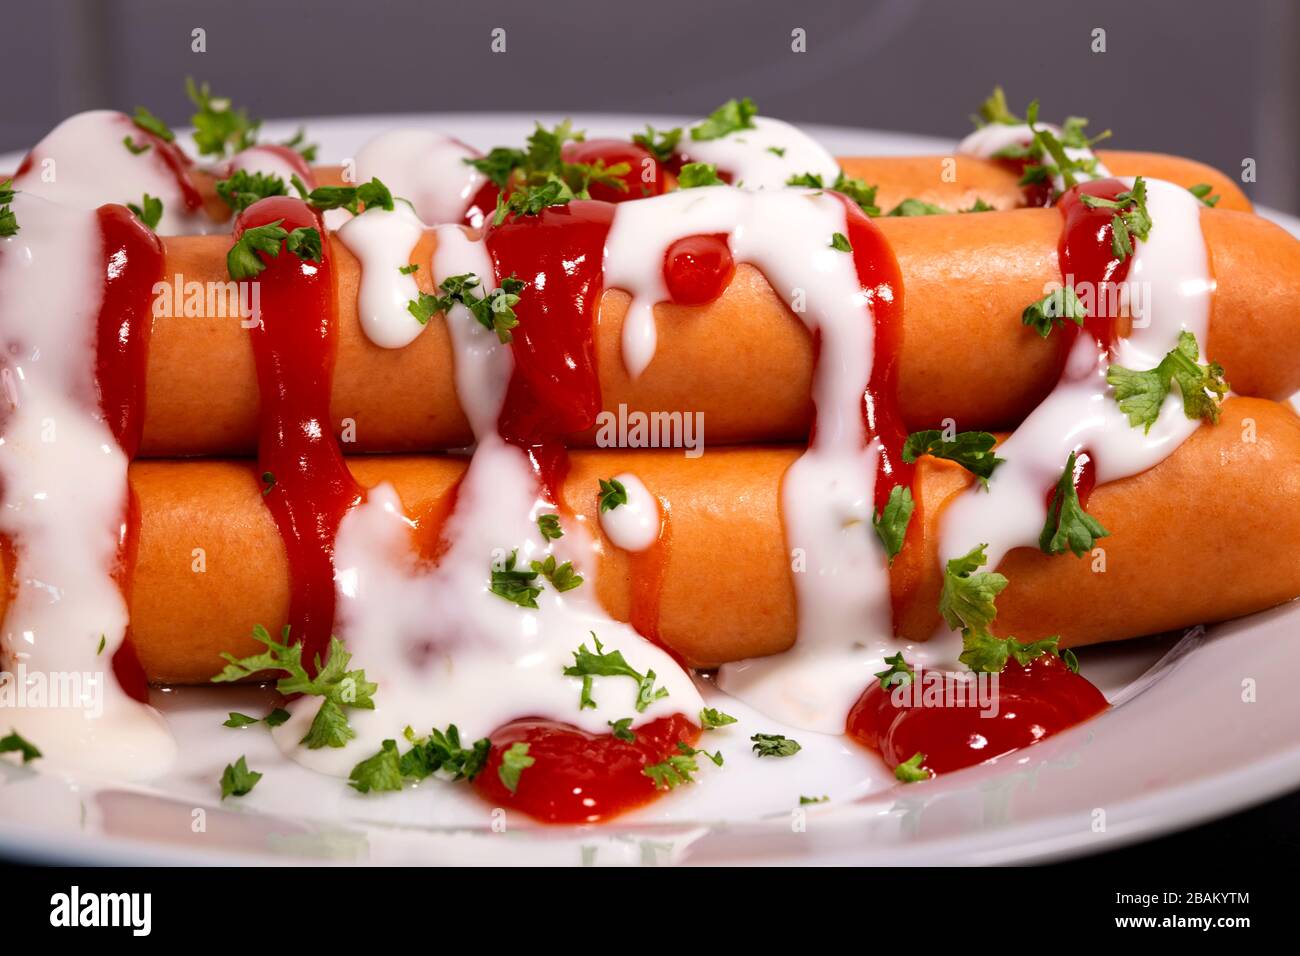 Boiled sausages with ketchup, mayonnaise and herbs on the plate Stock Photo